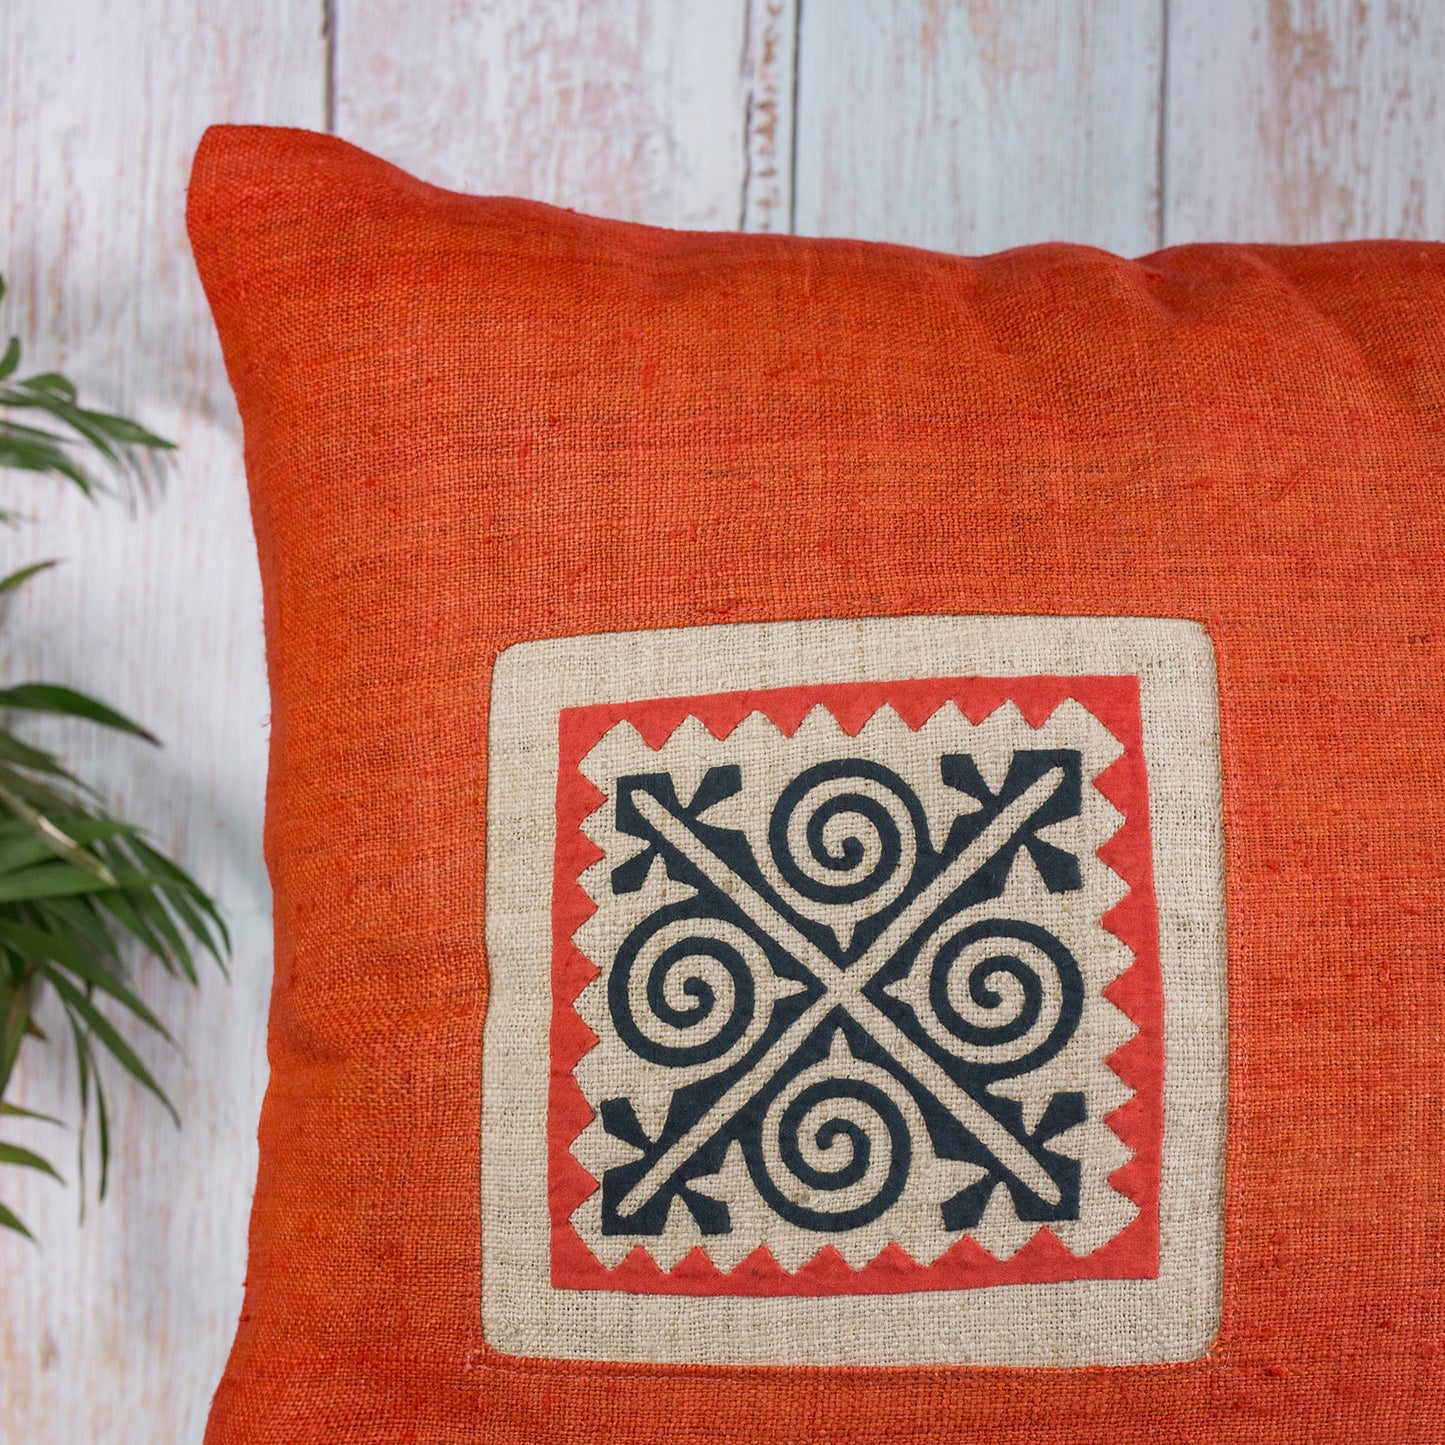 Orange Hemp Cushion Cover with stripes in different colors, hand-stitched pattern in black and orange